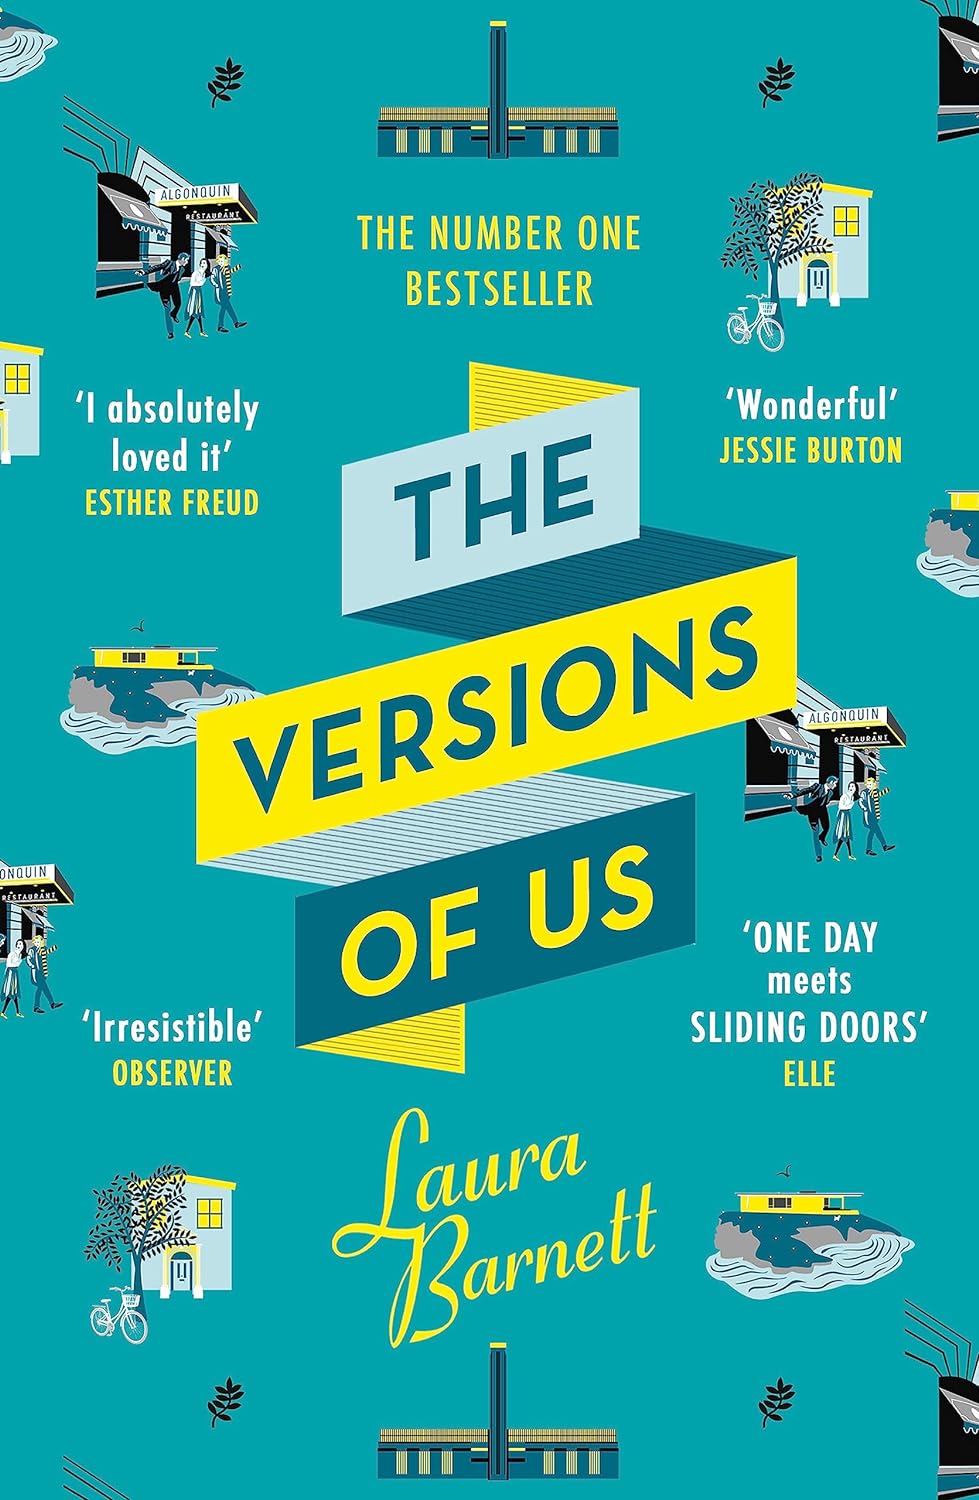 Laura Barnett’s novel explores how a chance meeting can change everything